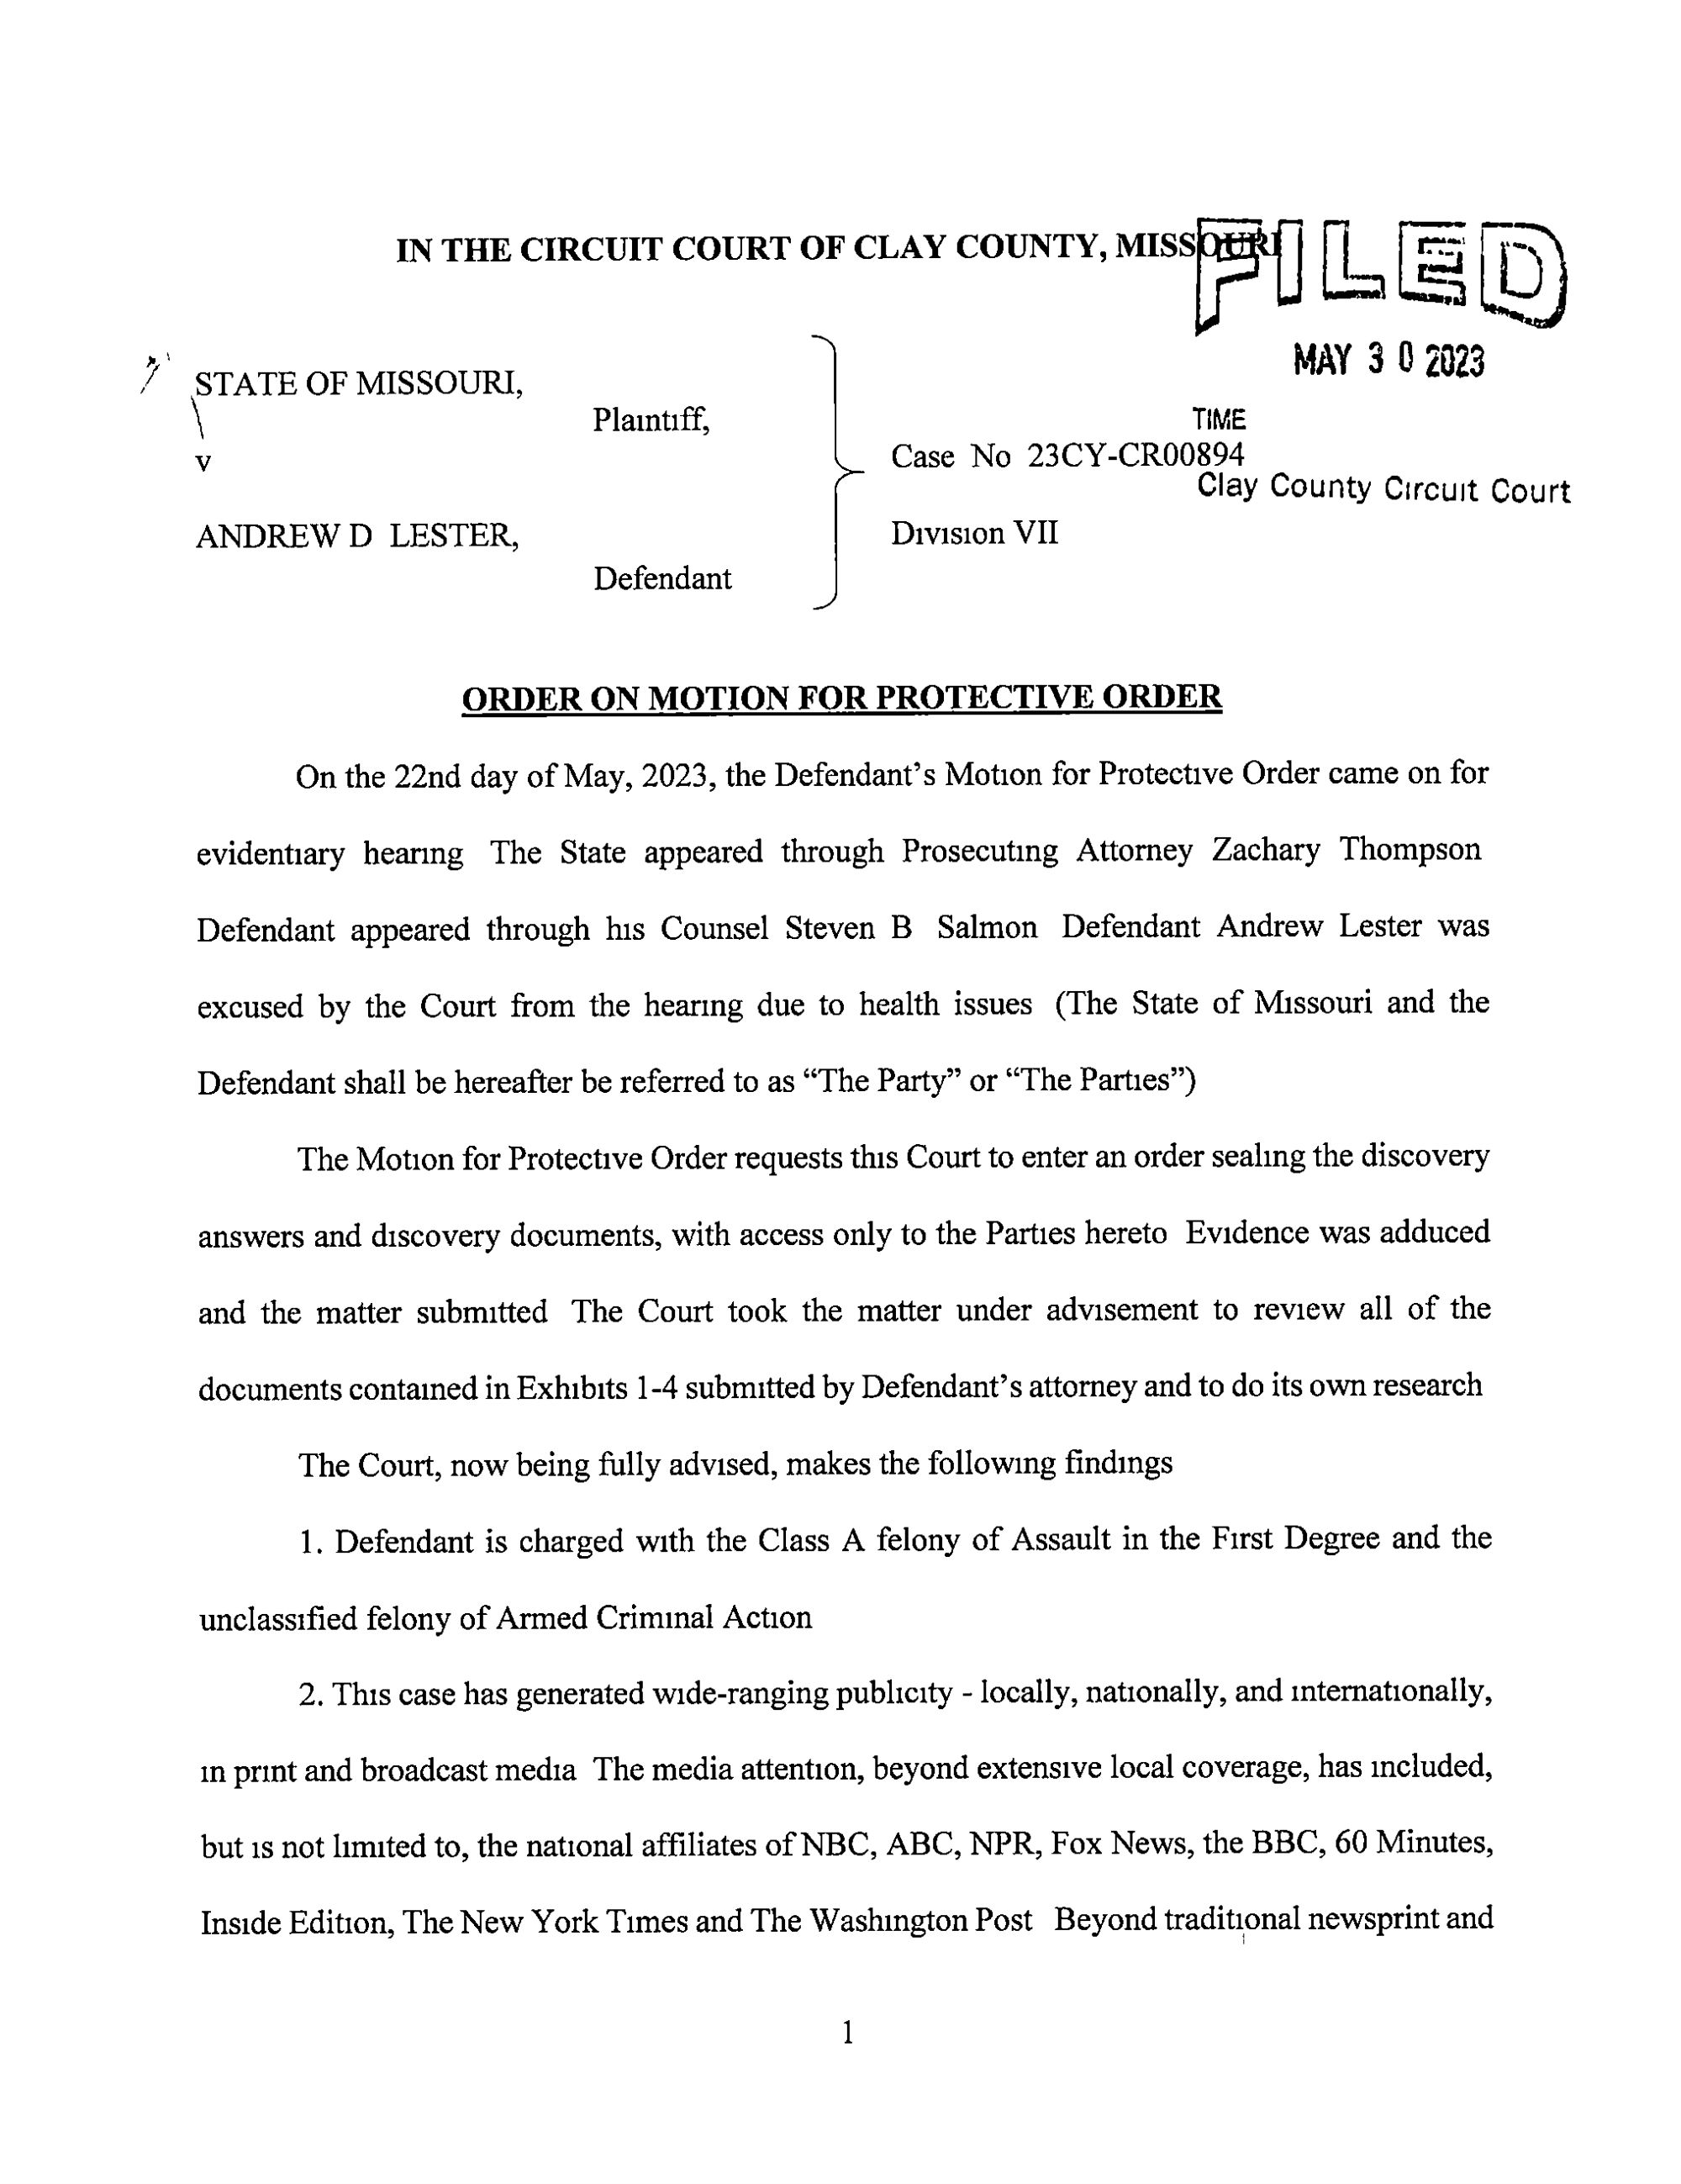 Page 1 of State v. Andrew Lester: Protective Order